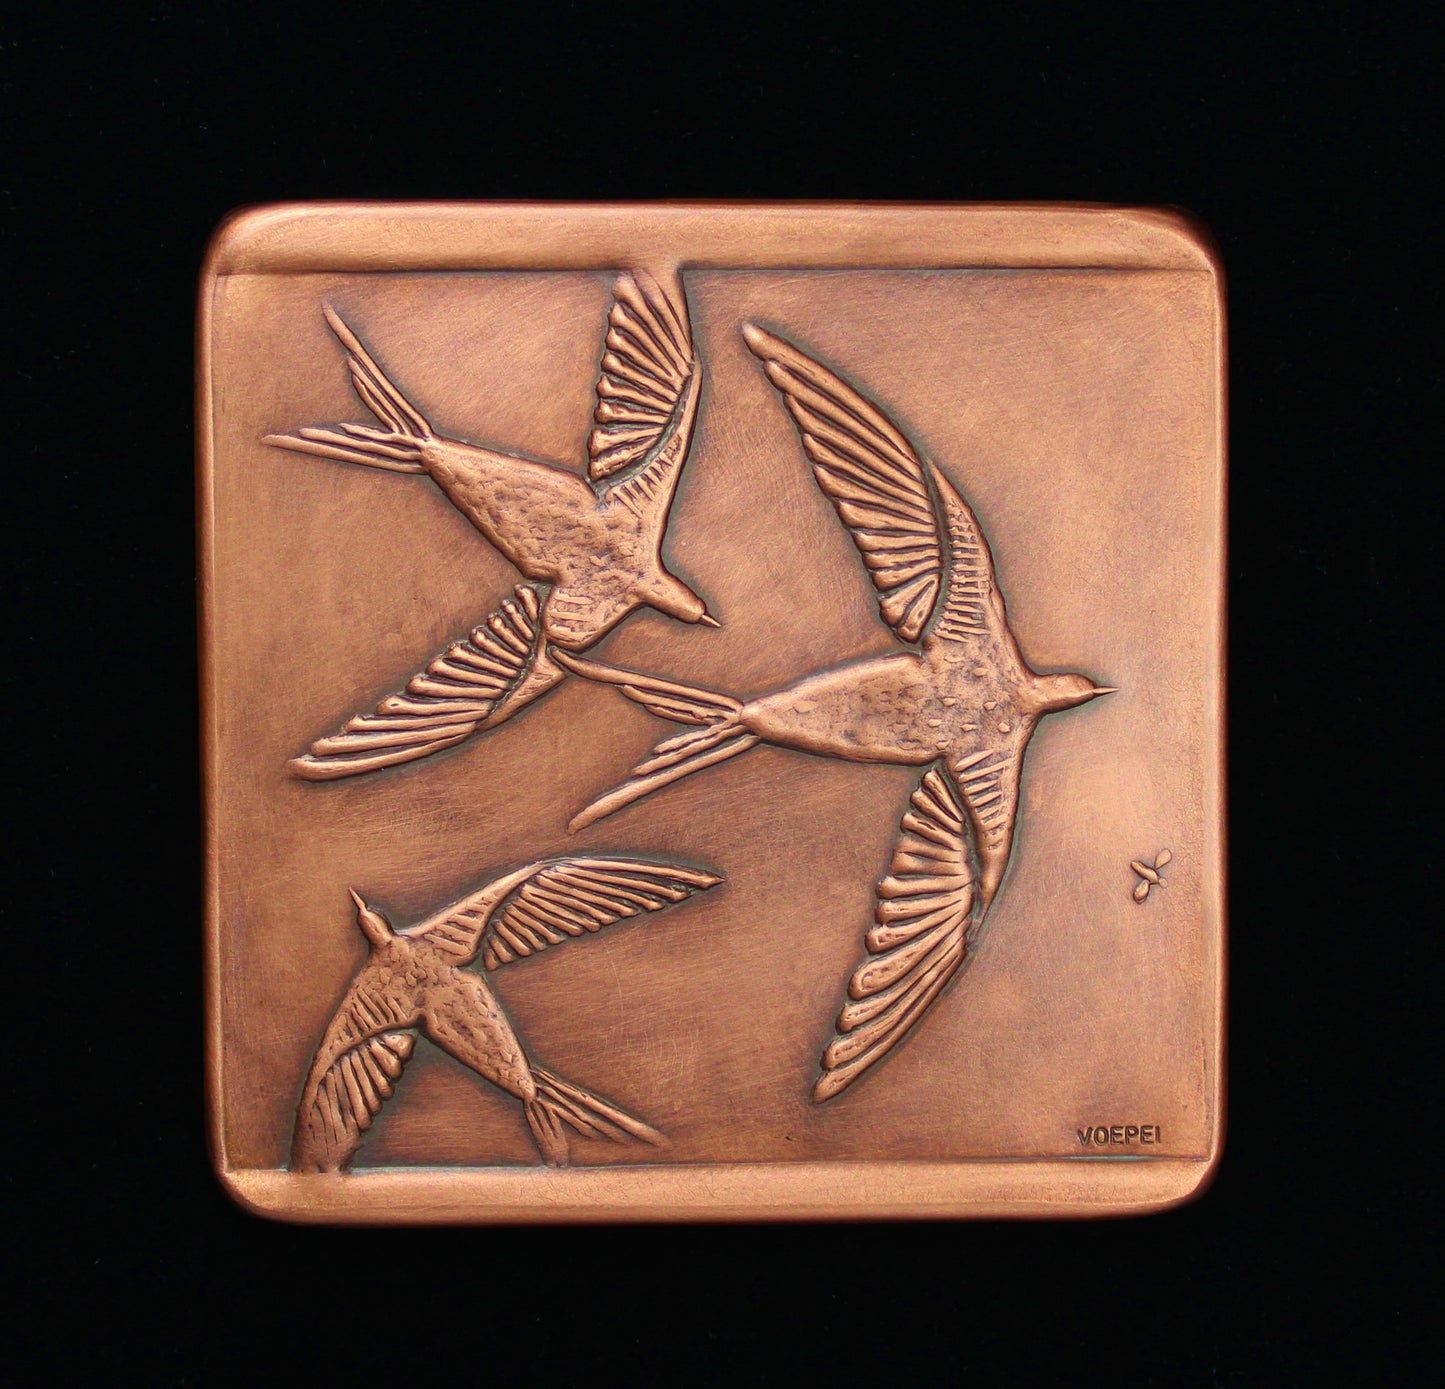 Swallows in Flight Copper Tile, Facing Right, 6"x 6" x 1/4"